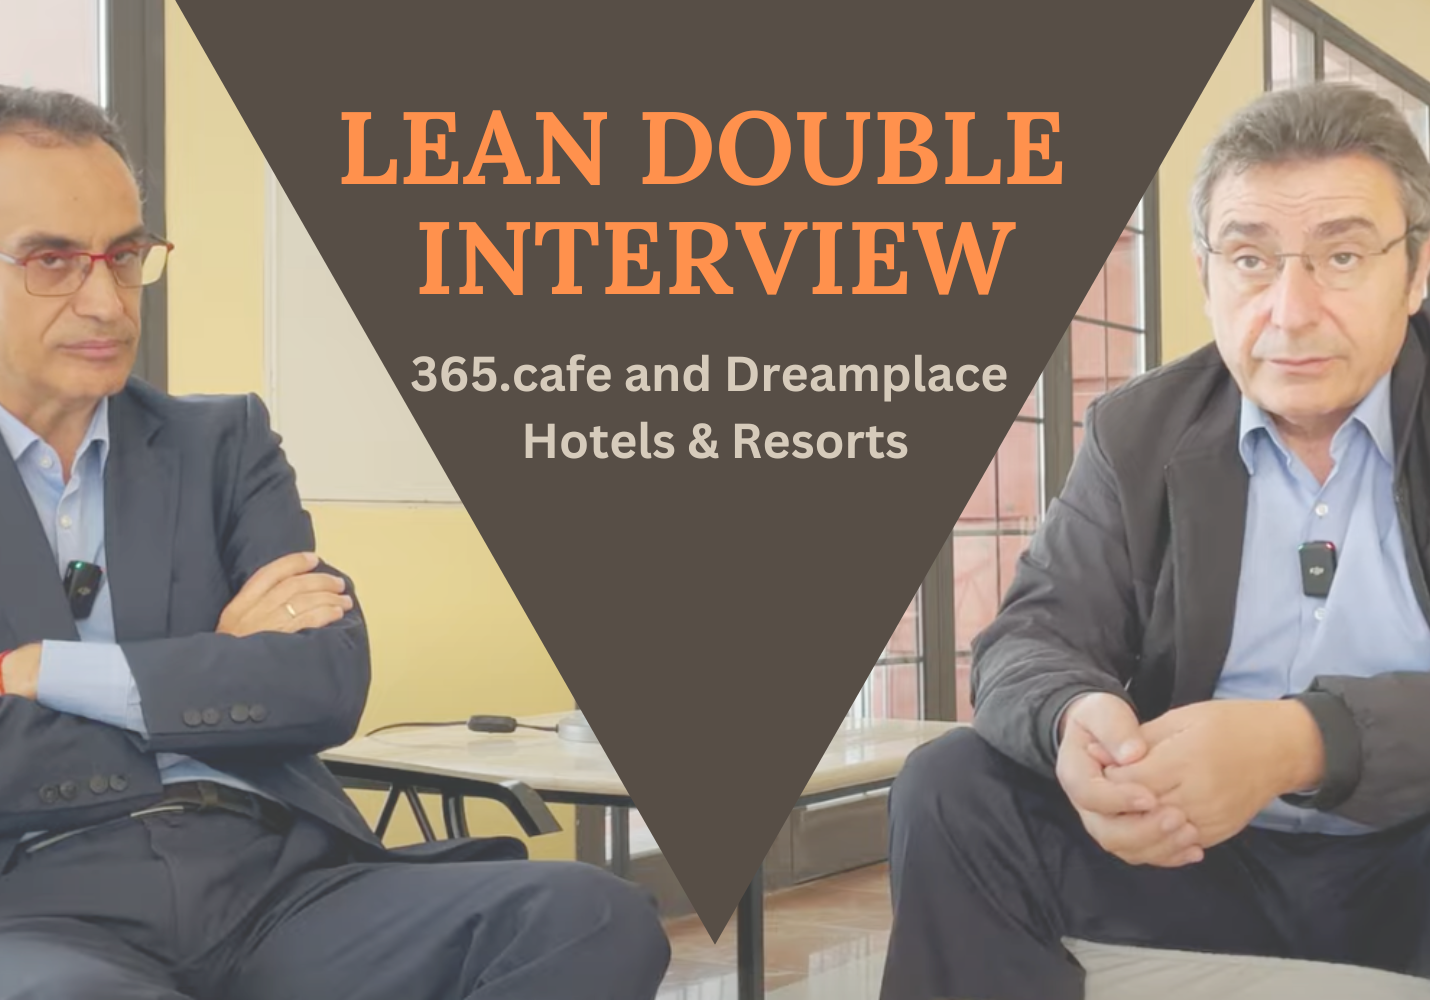 Lean-double-interview-Dreamplace-365